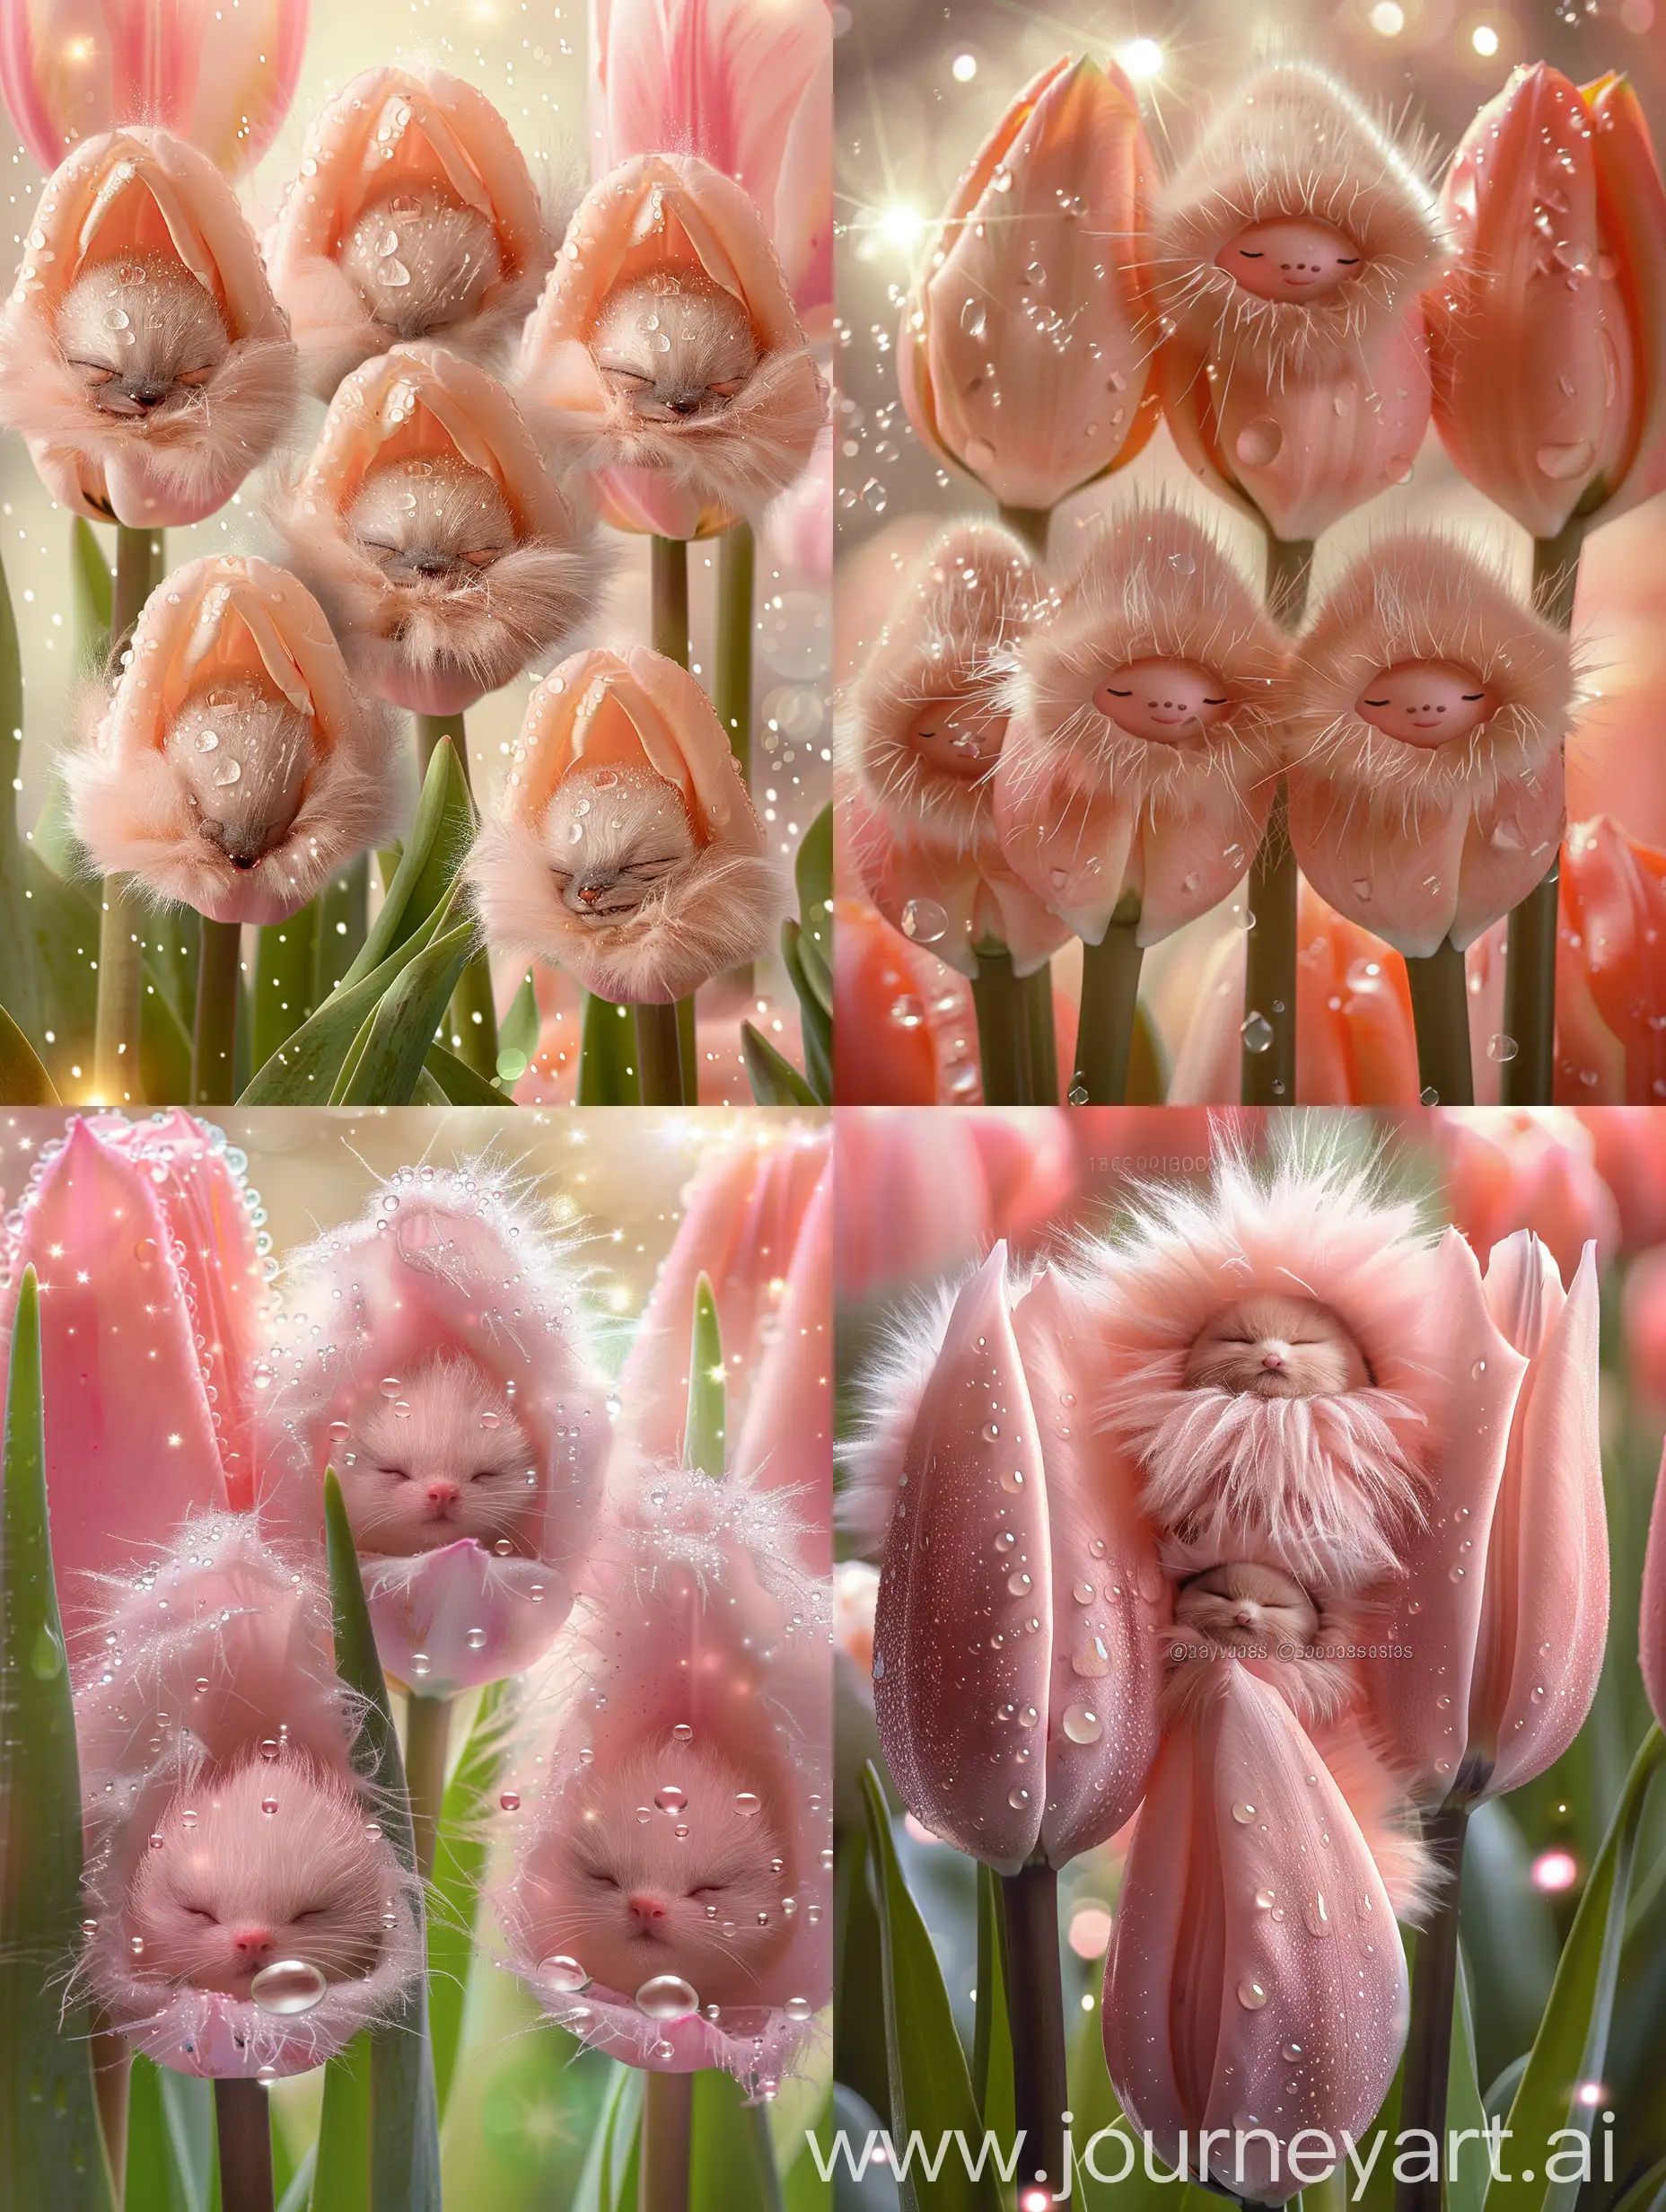 Adorable-Fluffy-Creatures-Sleeping-in-Oversized-Pink-Tulip-Flowers